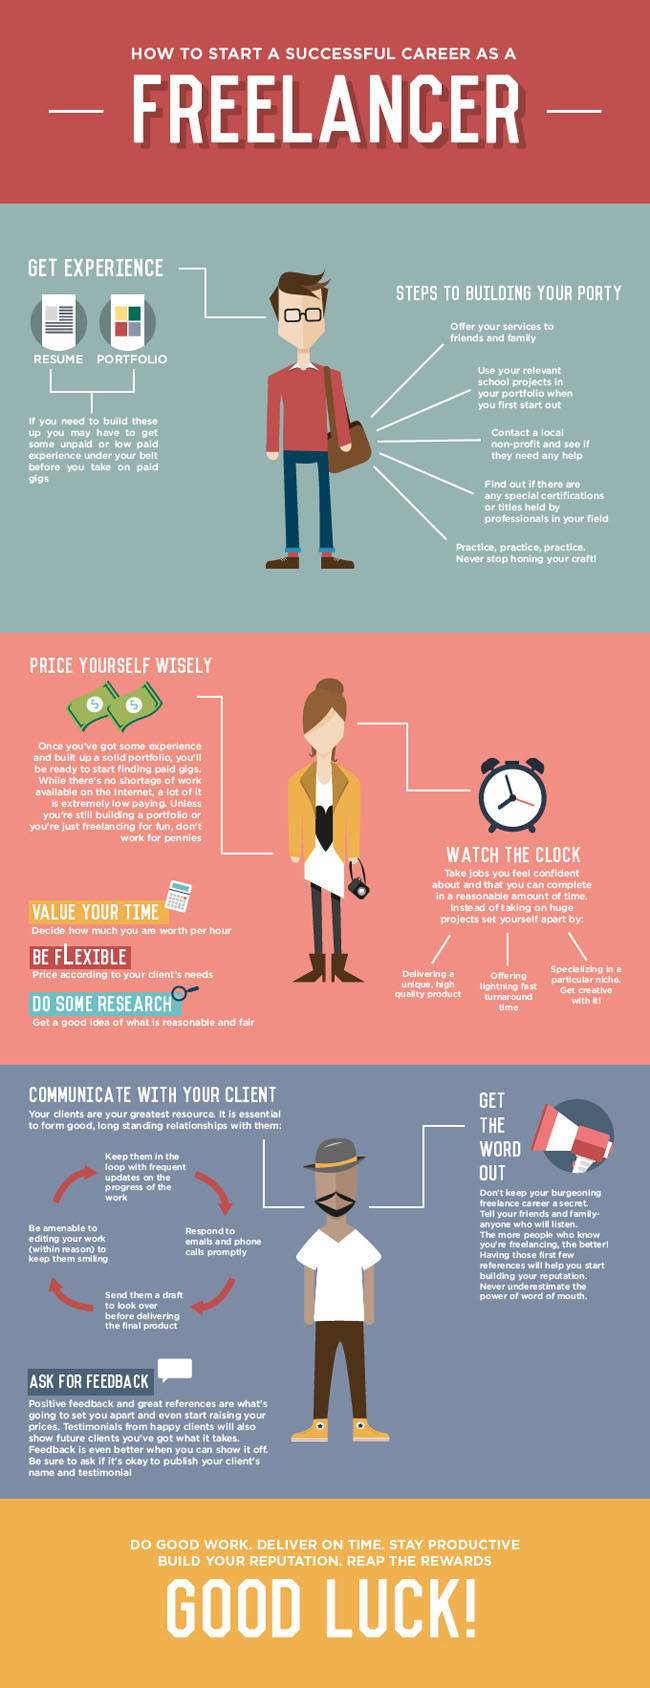 Infographic design idea #220: Starting Your Successful Career as a Freelancer [Infographic]